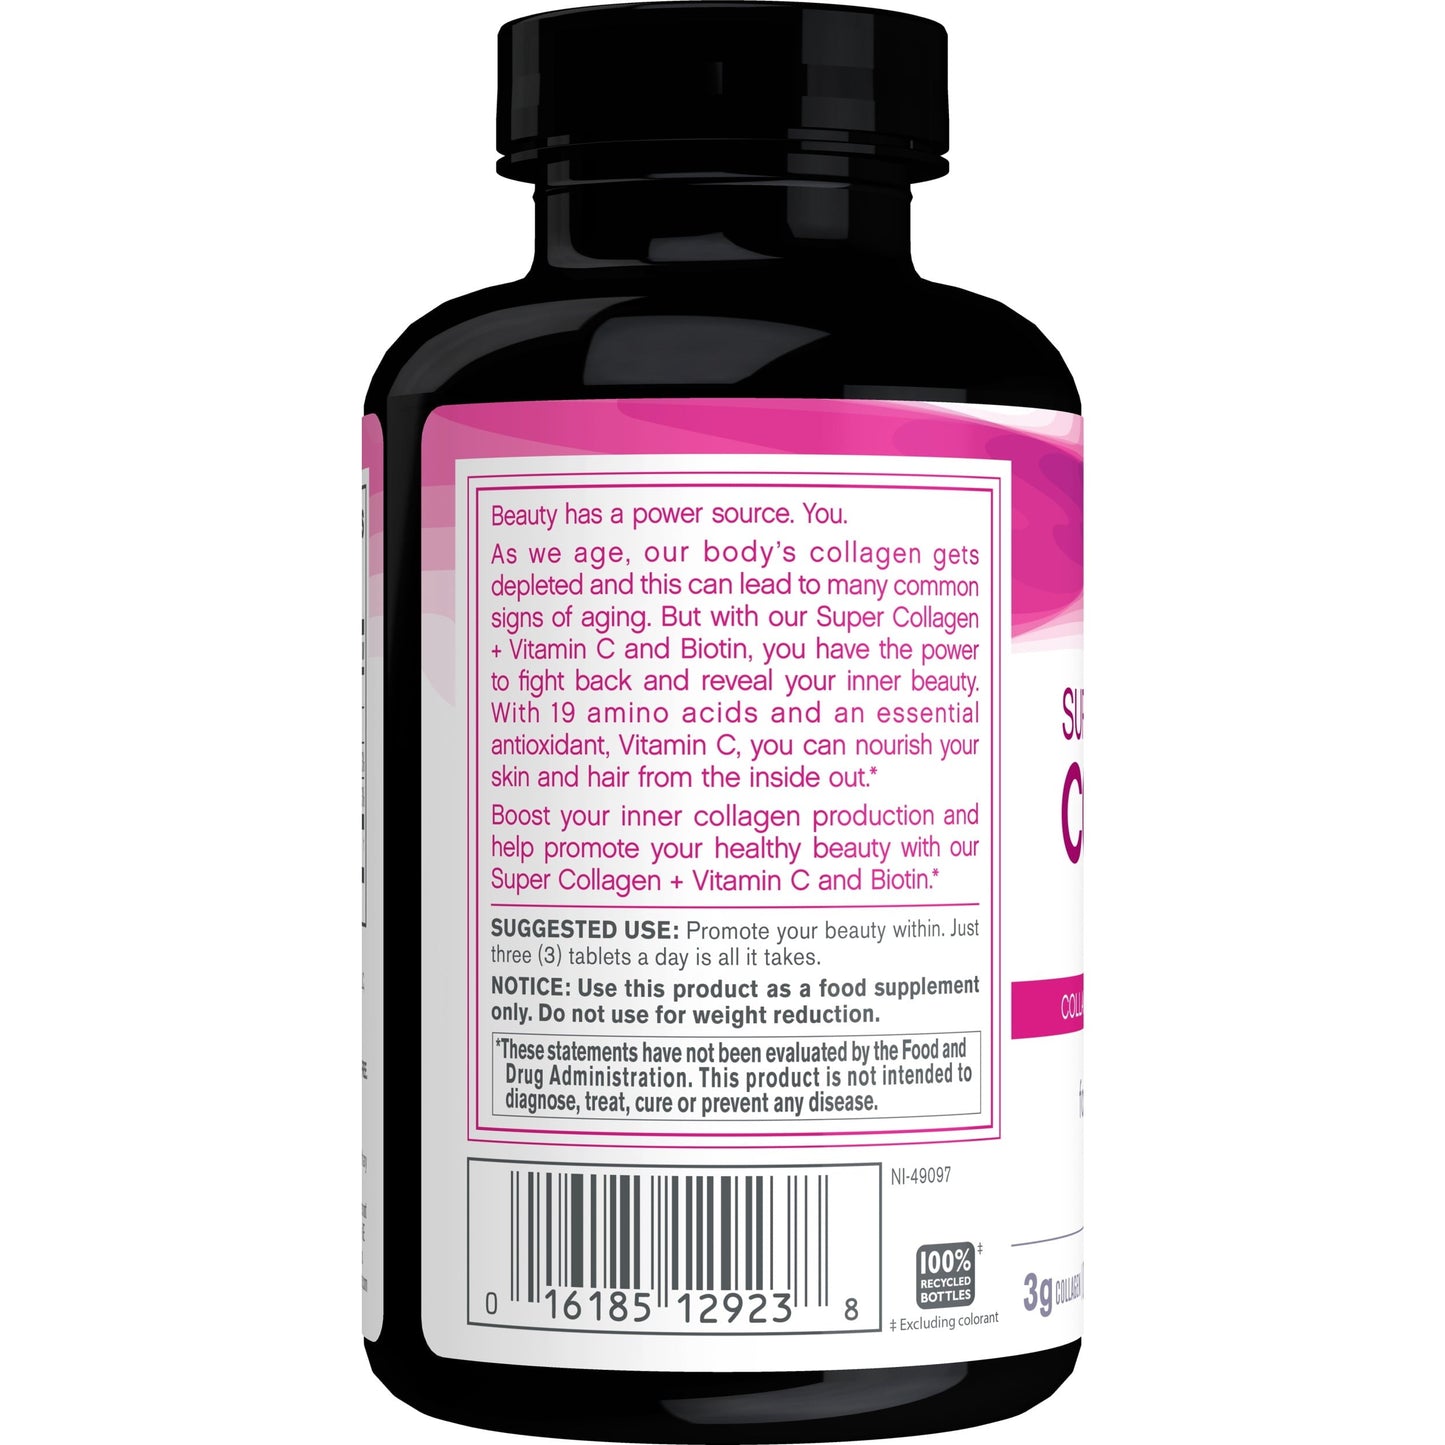 NeoCell Super Collagen + Vitamin C & Biotin, Supplement, for Hair, Skin, and Nails, 90 Tablets